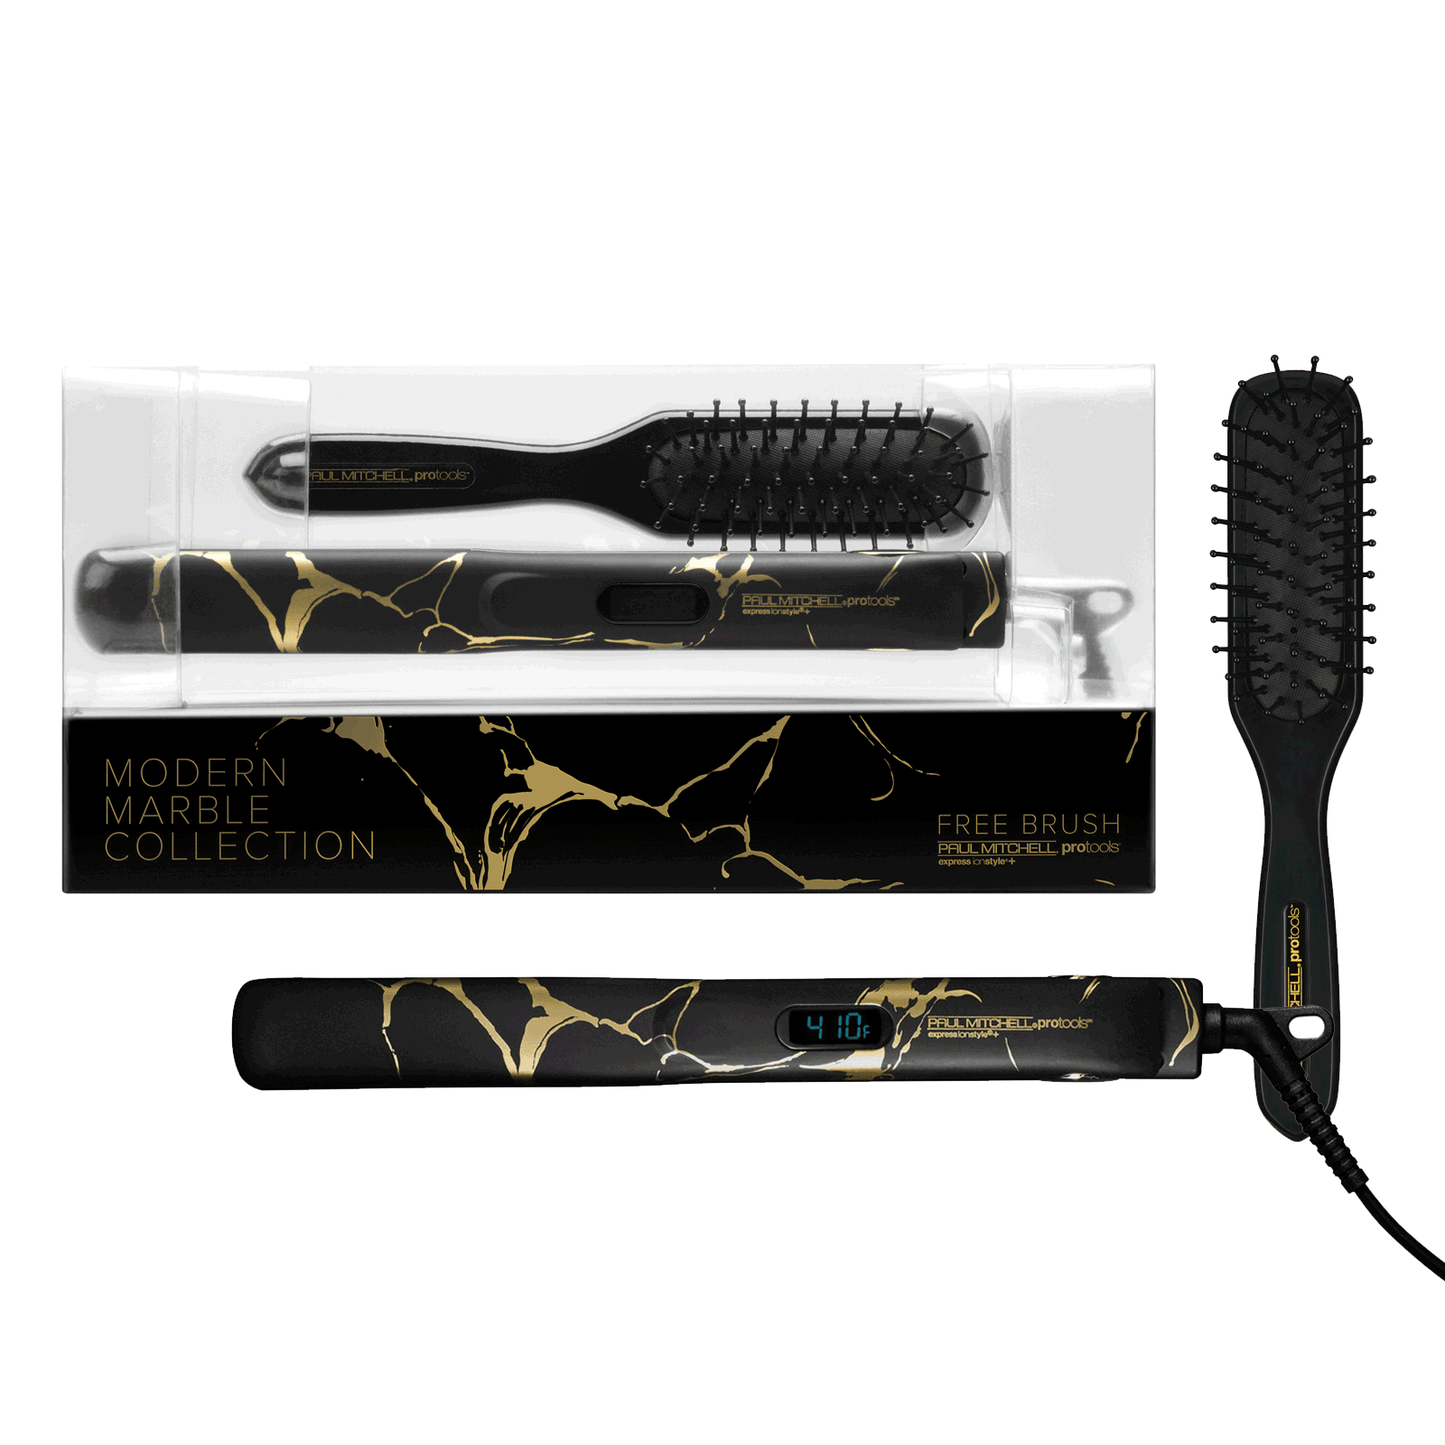 PRO TOOLS - Express Ion Style+ 1" Styling Iron with Free 413 Sculpting Brush (Modern Marble) - Hypnotic Store